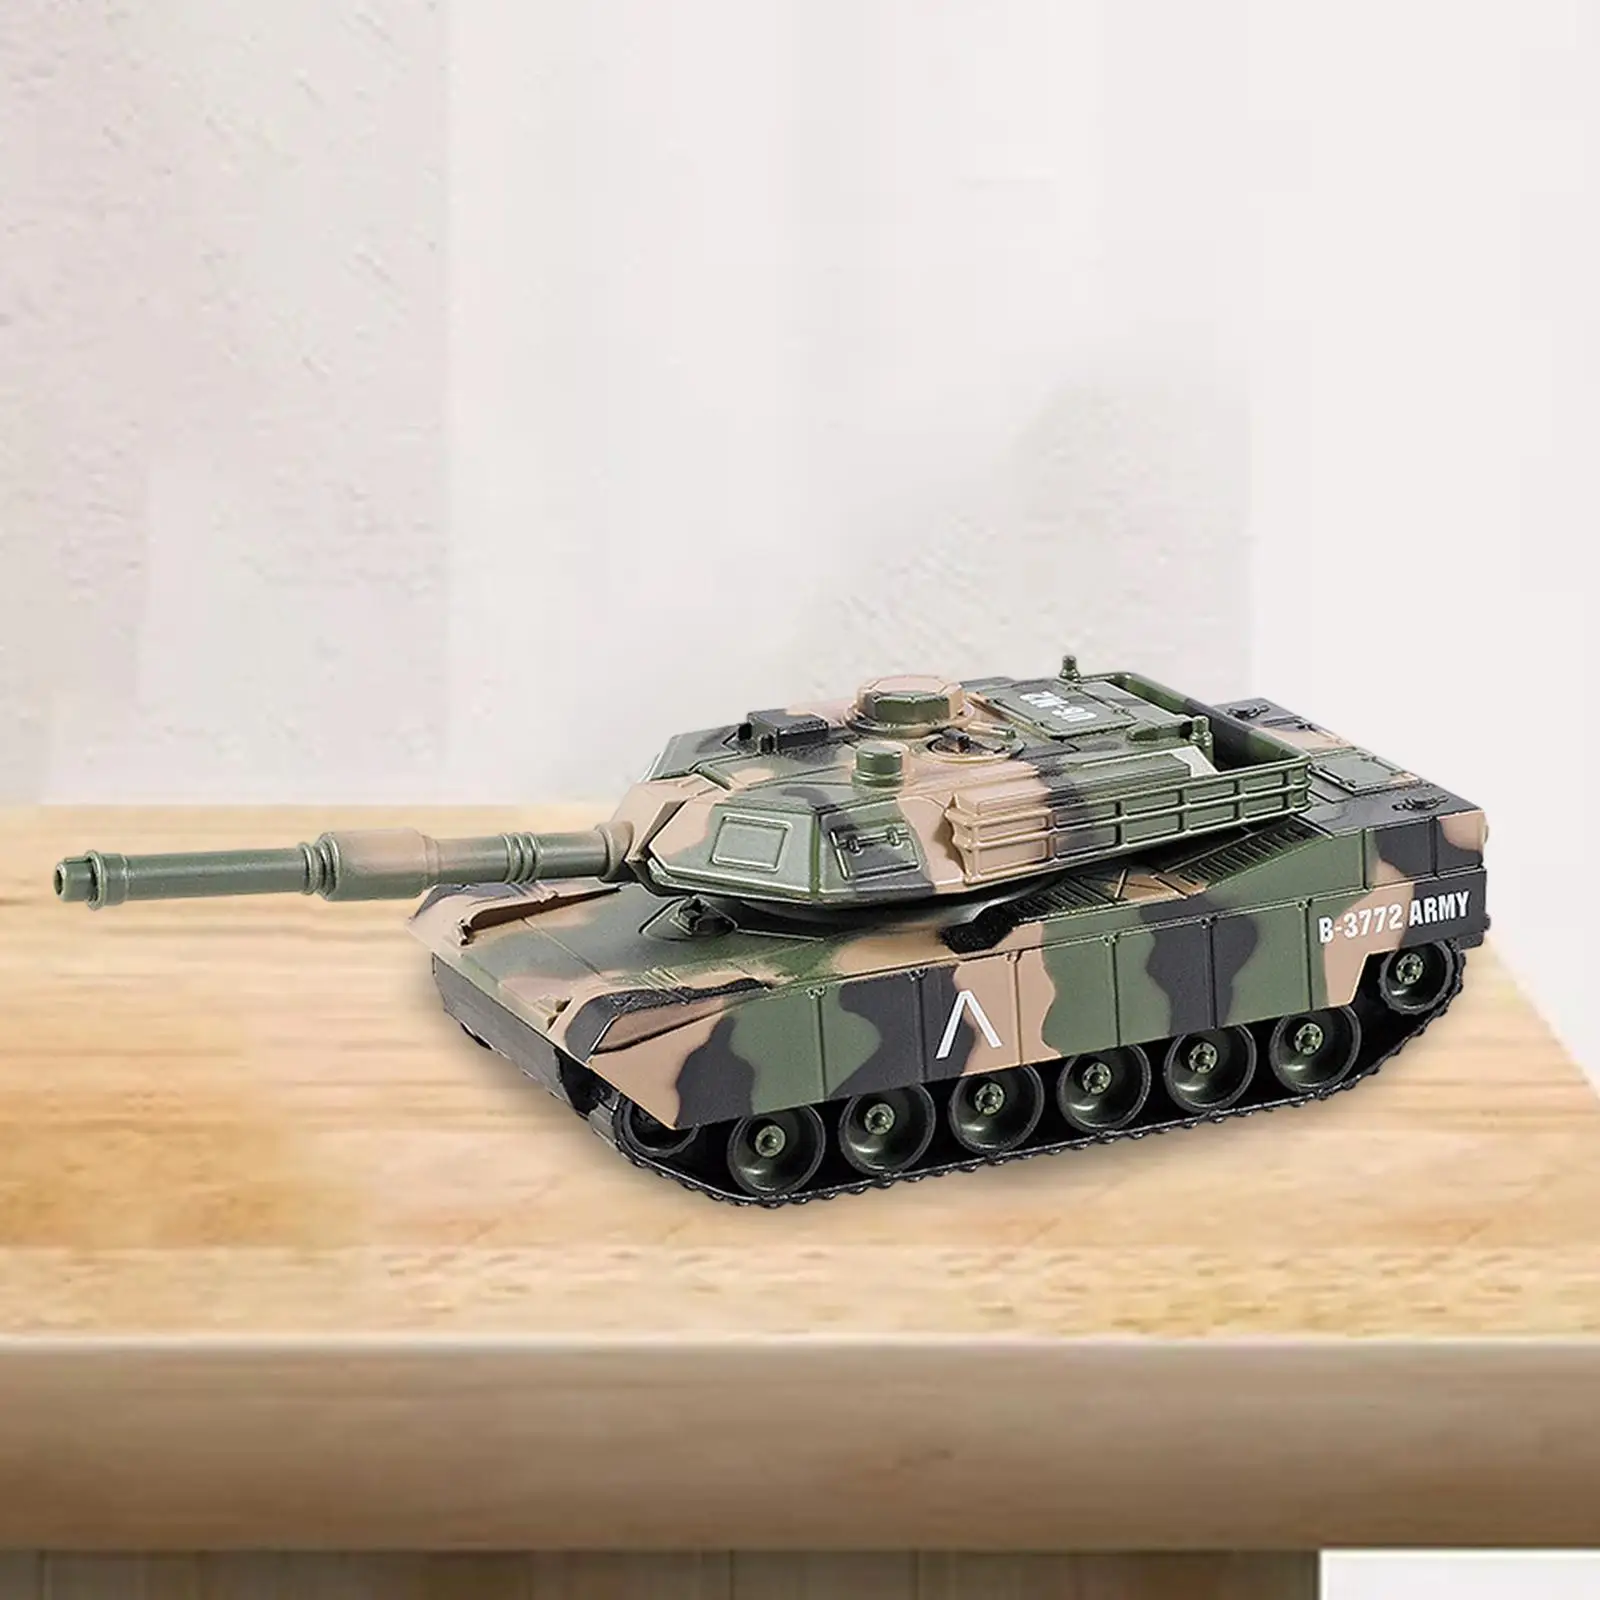 1/24 Scale Tank Toy Creative Realistic Educational Toys Vehicle Pull Back Tank Toy for Girls 3-7 Years Old Boys Kids Gift